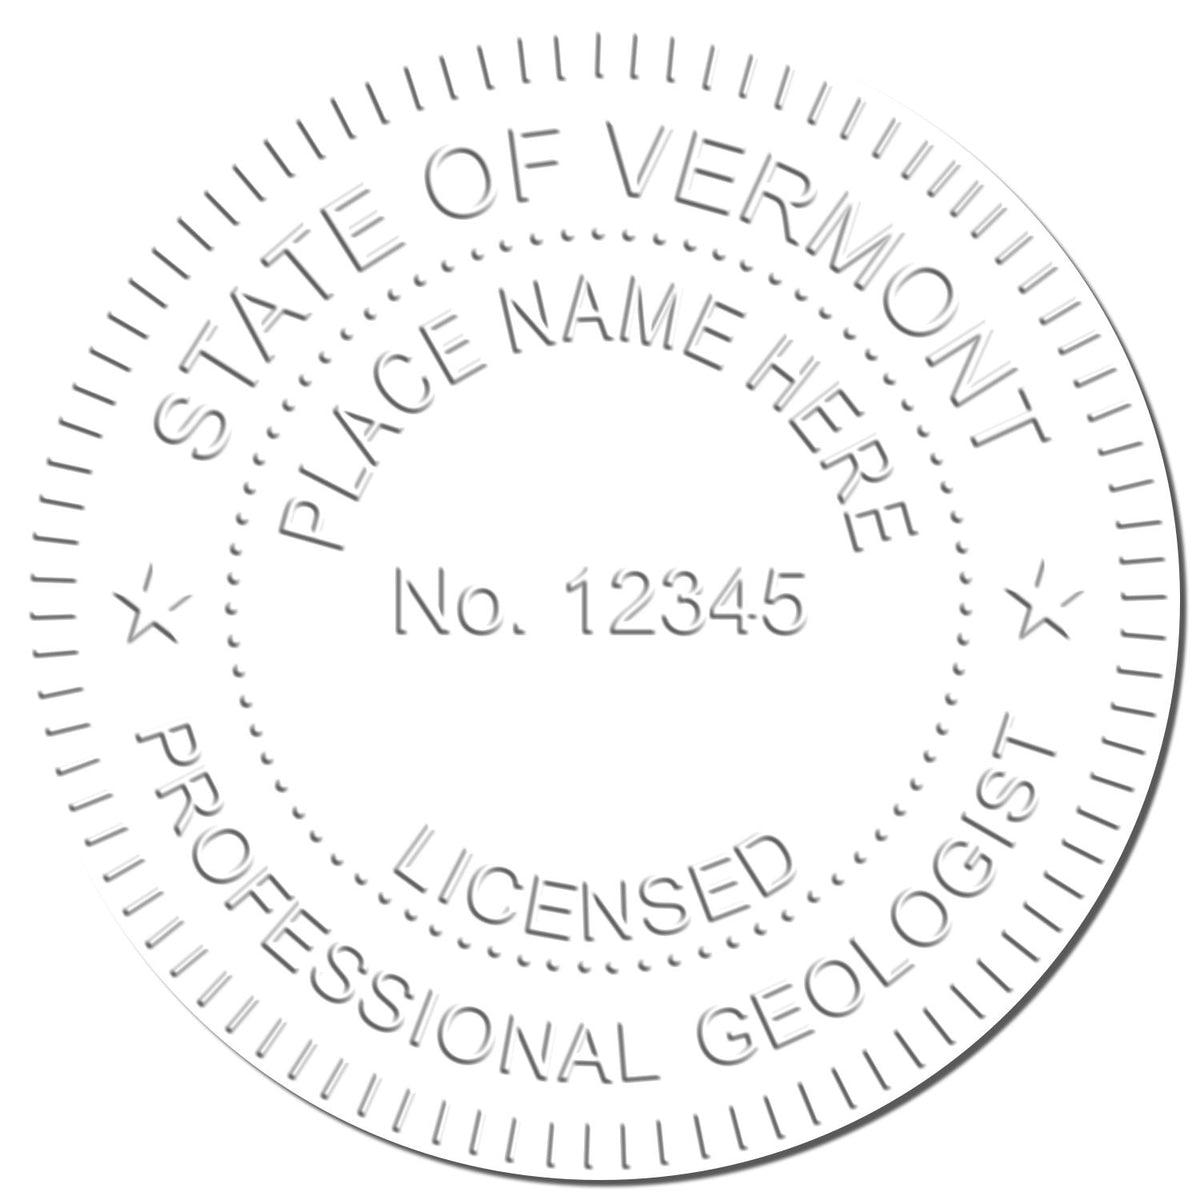 The Vermont Geologist Desk Seal stamp impression comes to life with a crisp, detailed image stamped on paper - showcasing true professional quality.